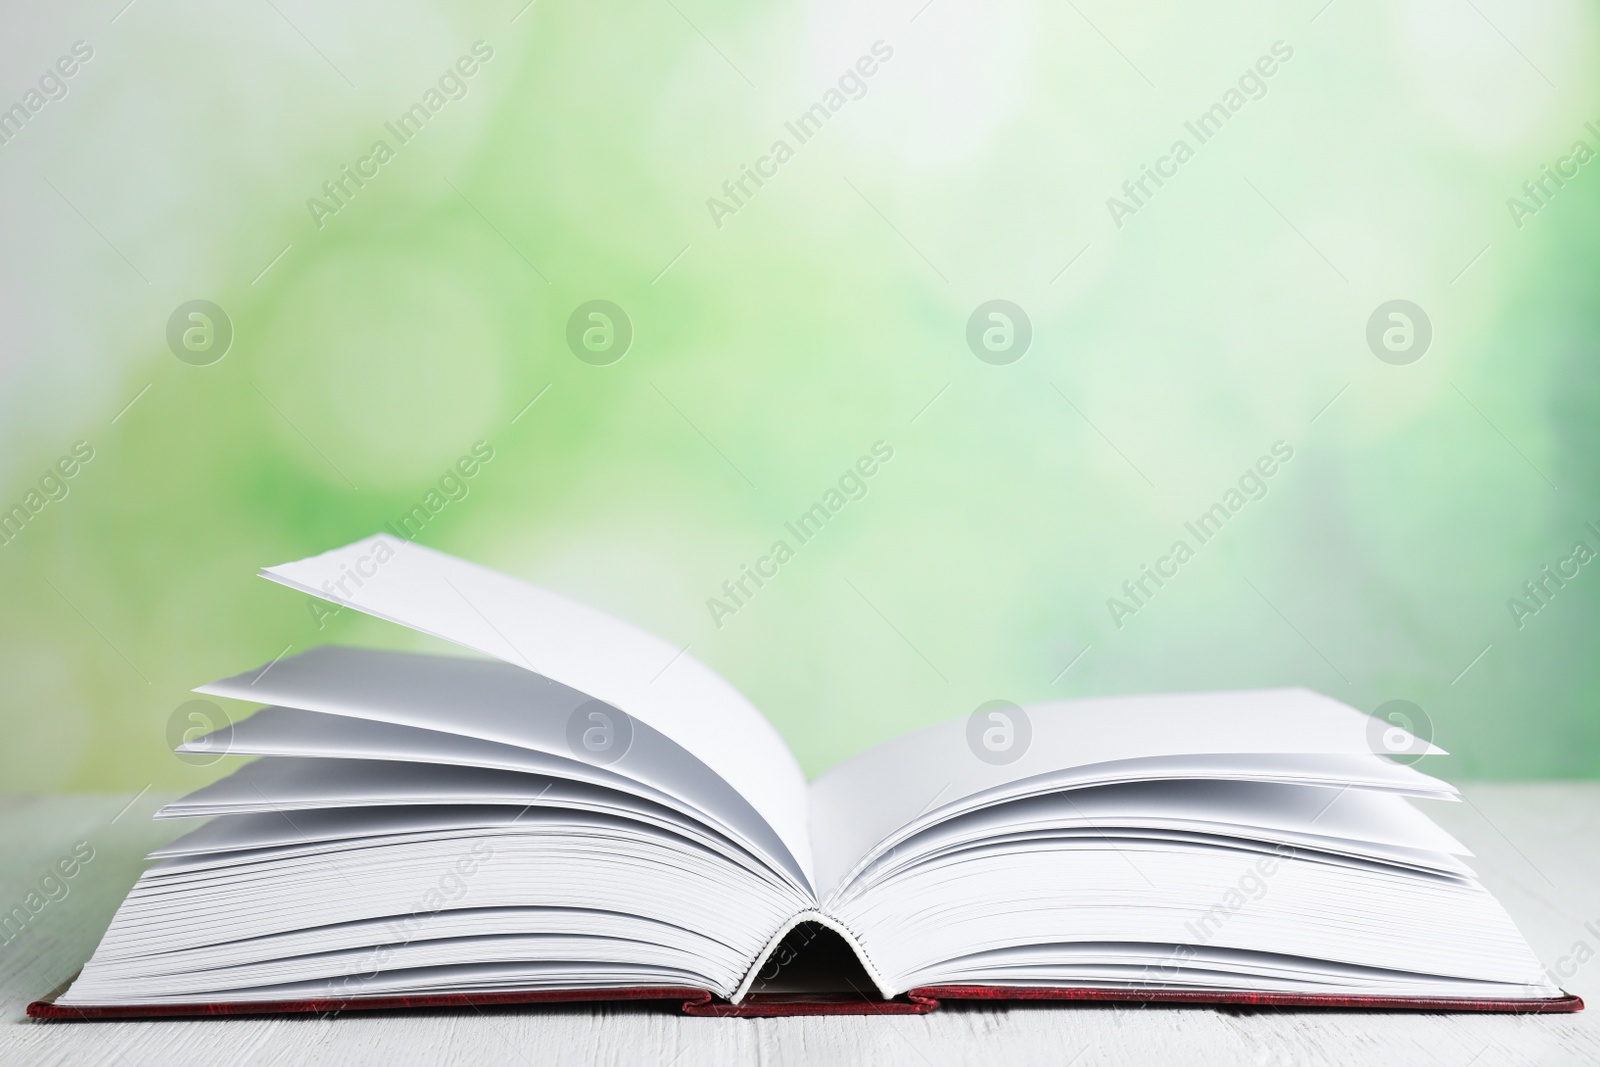 Photo of Open book on white wooden table against blurred green background. Space for text